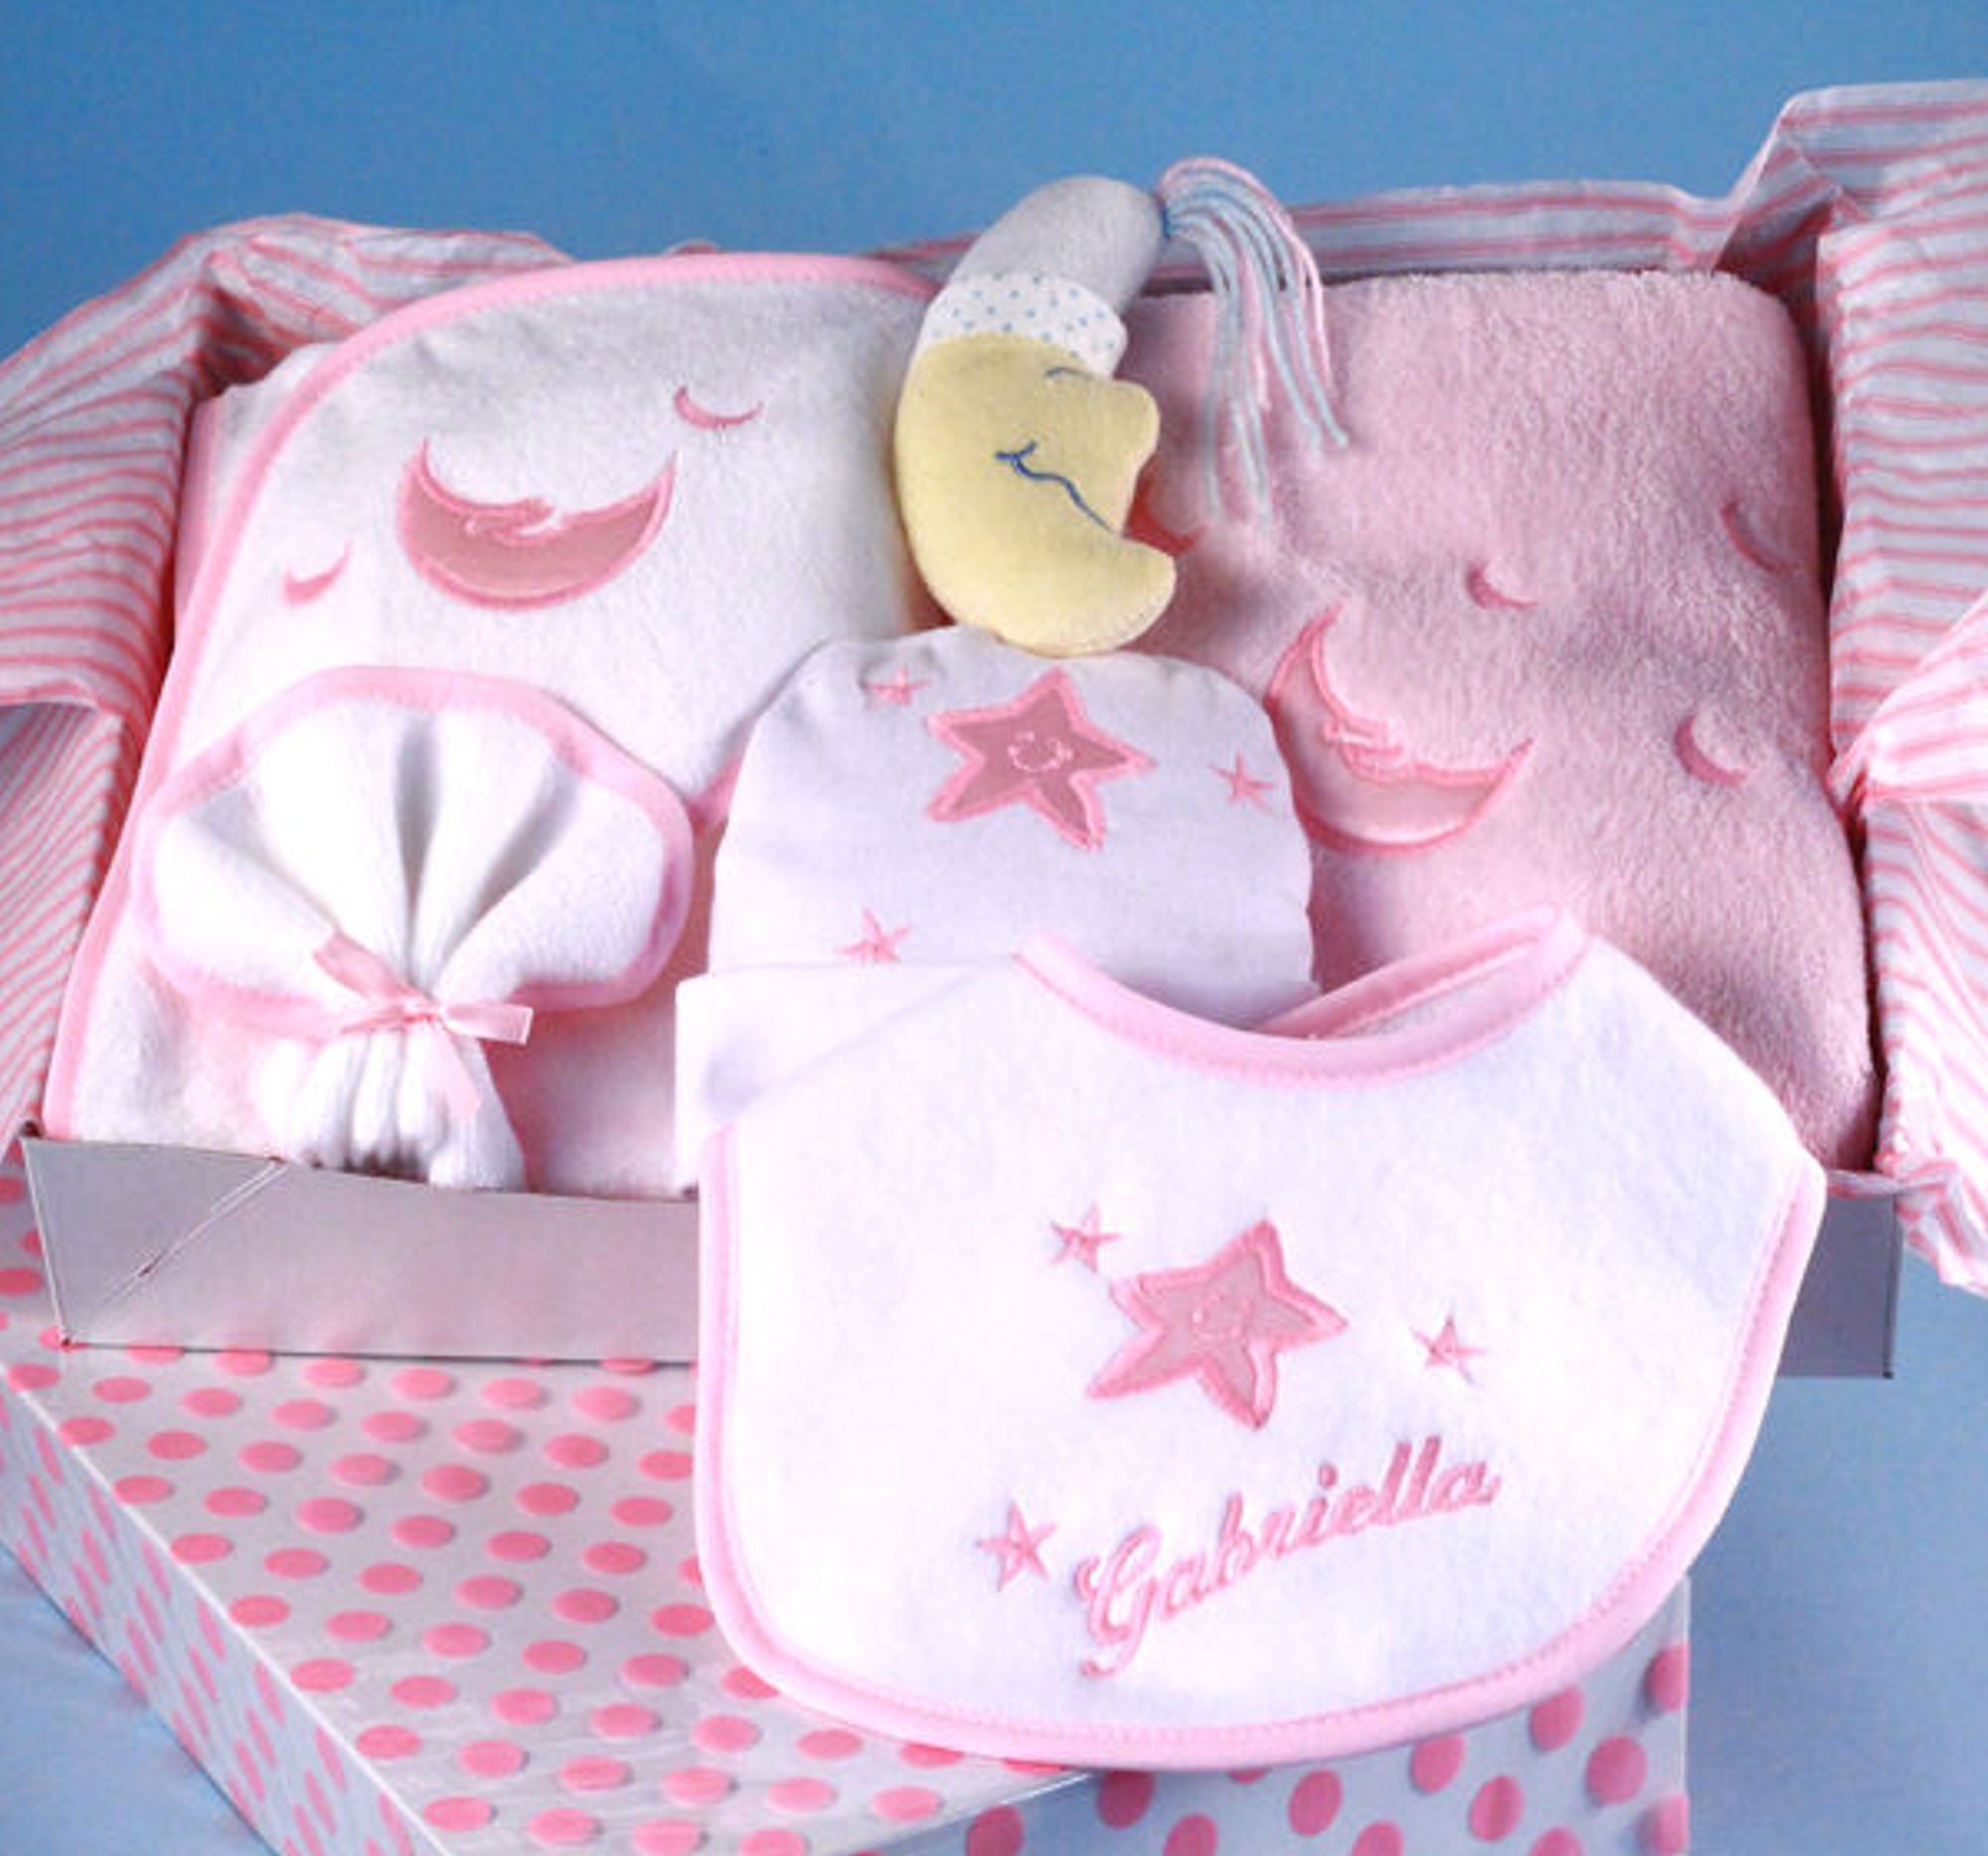 Personalized Baby Gifts For Girls
 Layette Girls Moon & Stars